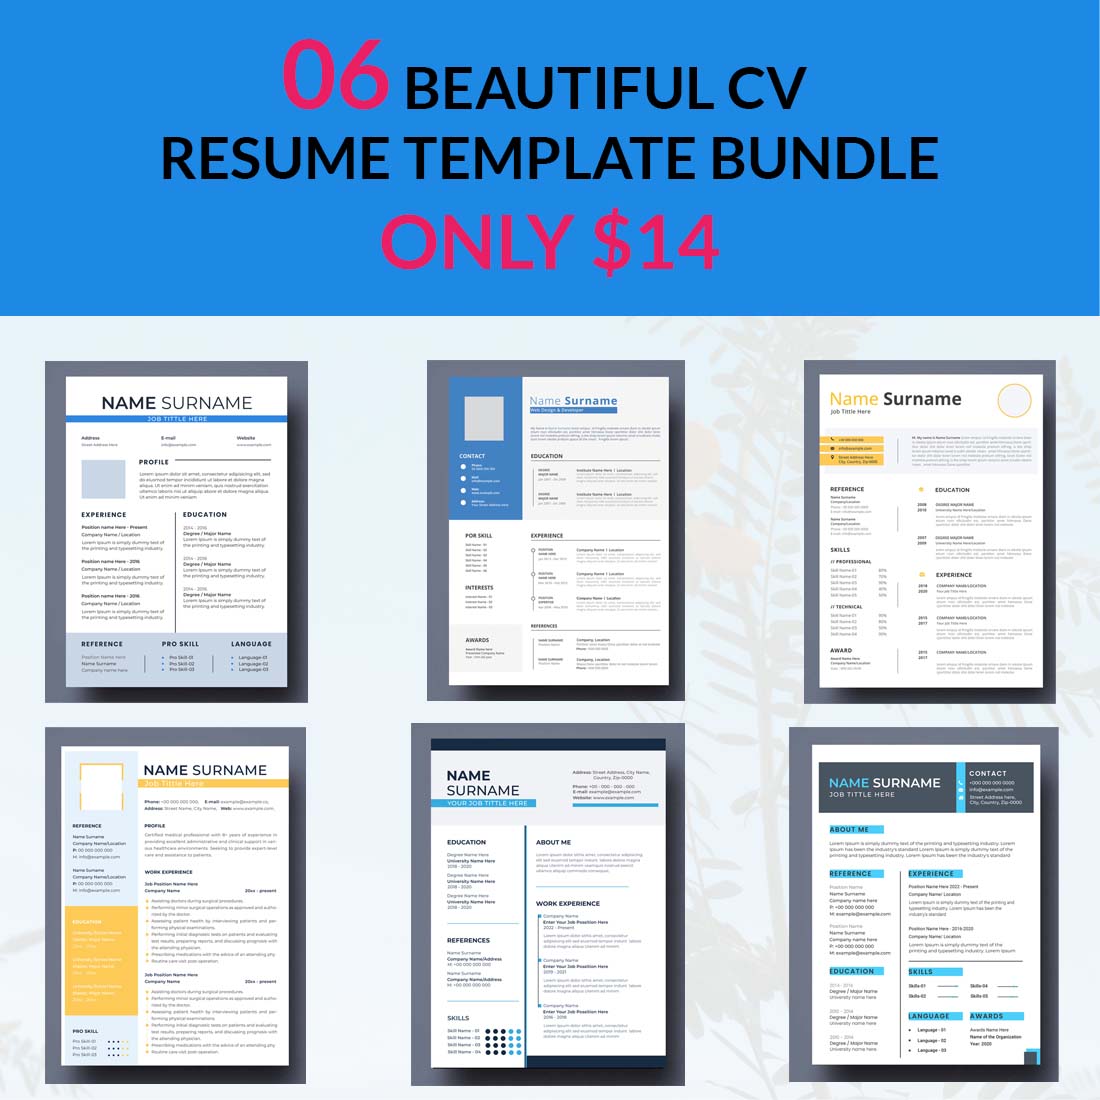 06 BEAUTIFUL CV RESUME TEMPLATE BUNDLE ONLY $14 preview image.